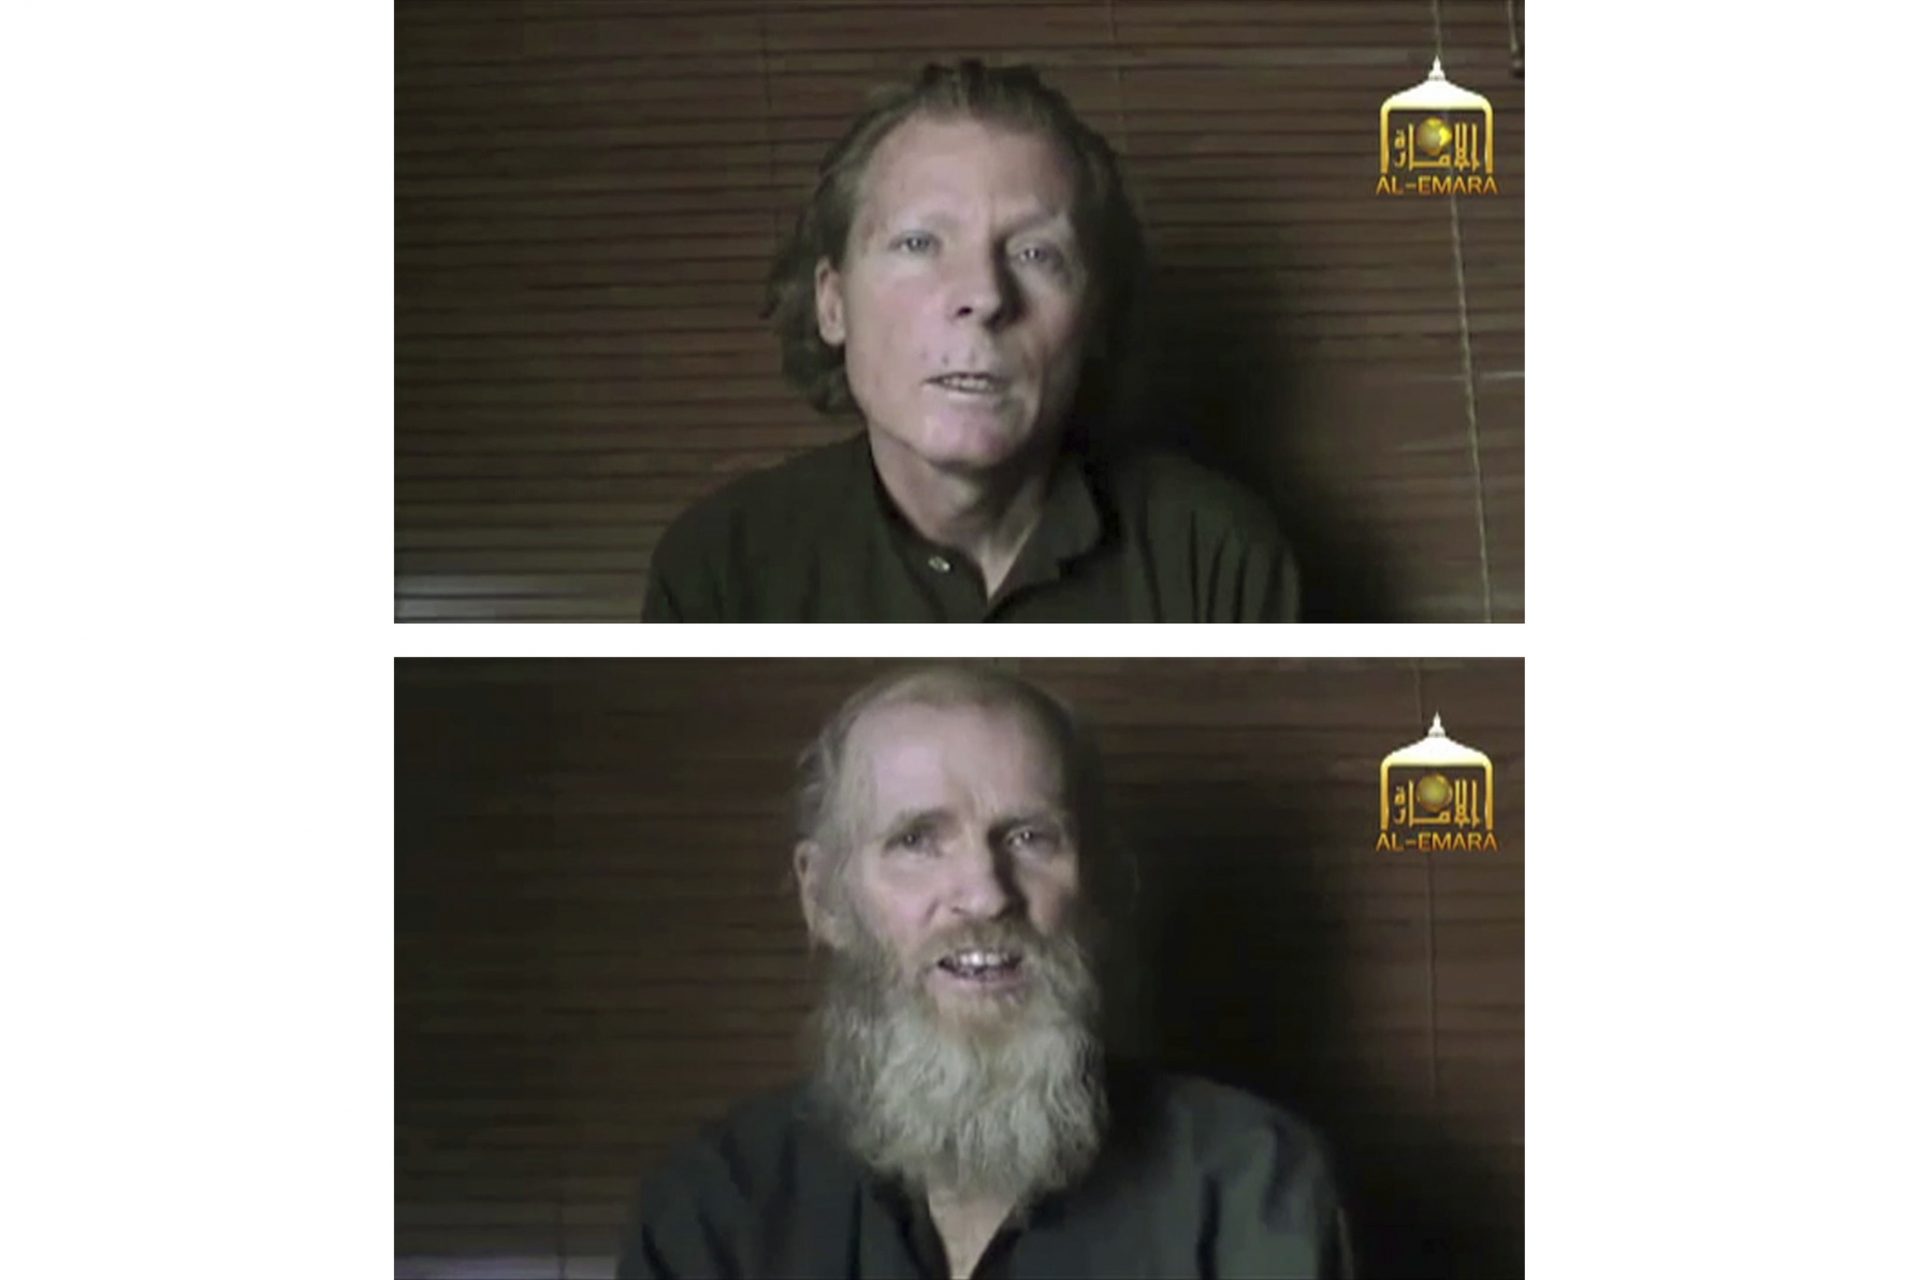 FILE PHOTO: This two photo combination image taken from video released June 21, 2017, by the Taliban spokesman Zabihullah Mujahid, shows kidnapped teachers Australian Timothy Weekes, top, and American Kevin King, who were both abducted by the insurgents in Afghanistan in August 2016. Three ranking Taliban prisoners released by the Kabul government have been flown to Qatar for an expected swap for the American and the Australian hostage held by the insurgents since their abduction in 2016, Taliban officials said Tuesday, Nov. 19, 2019.